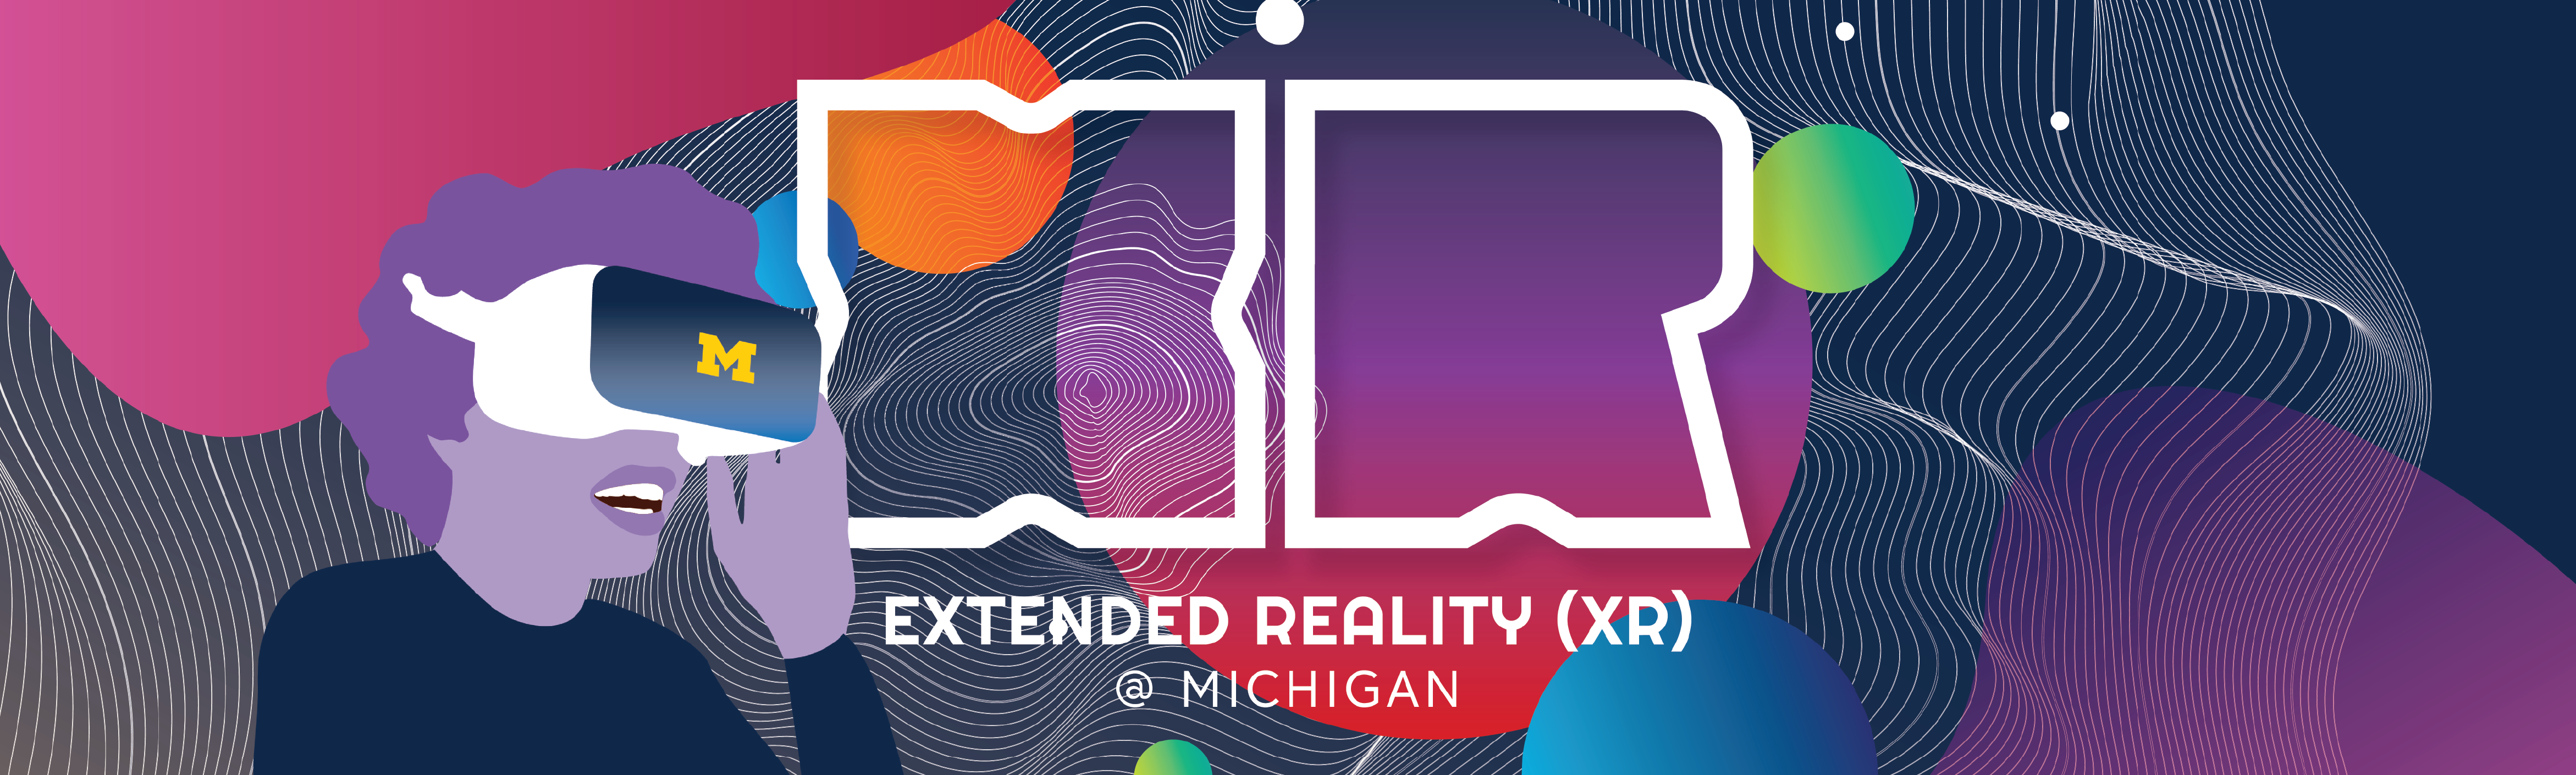 Extended Reality at Michigan